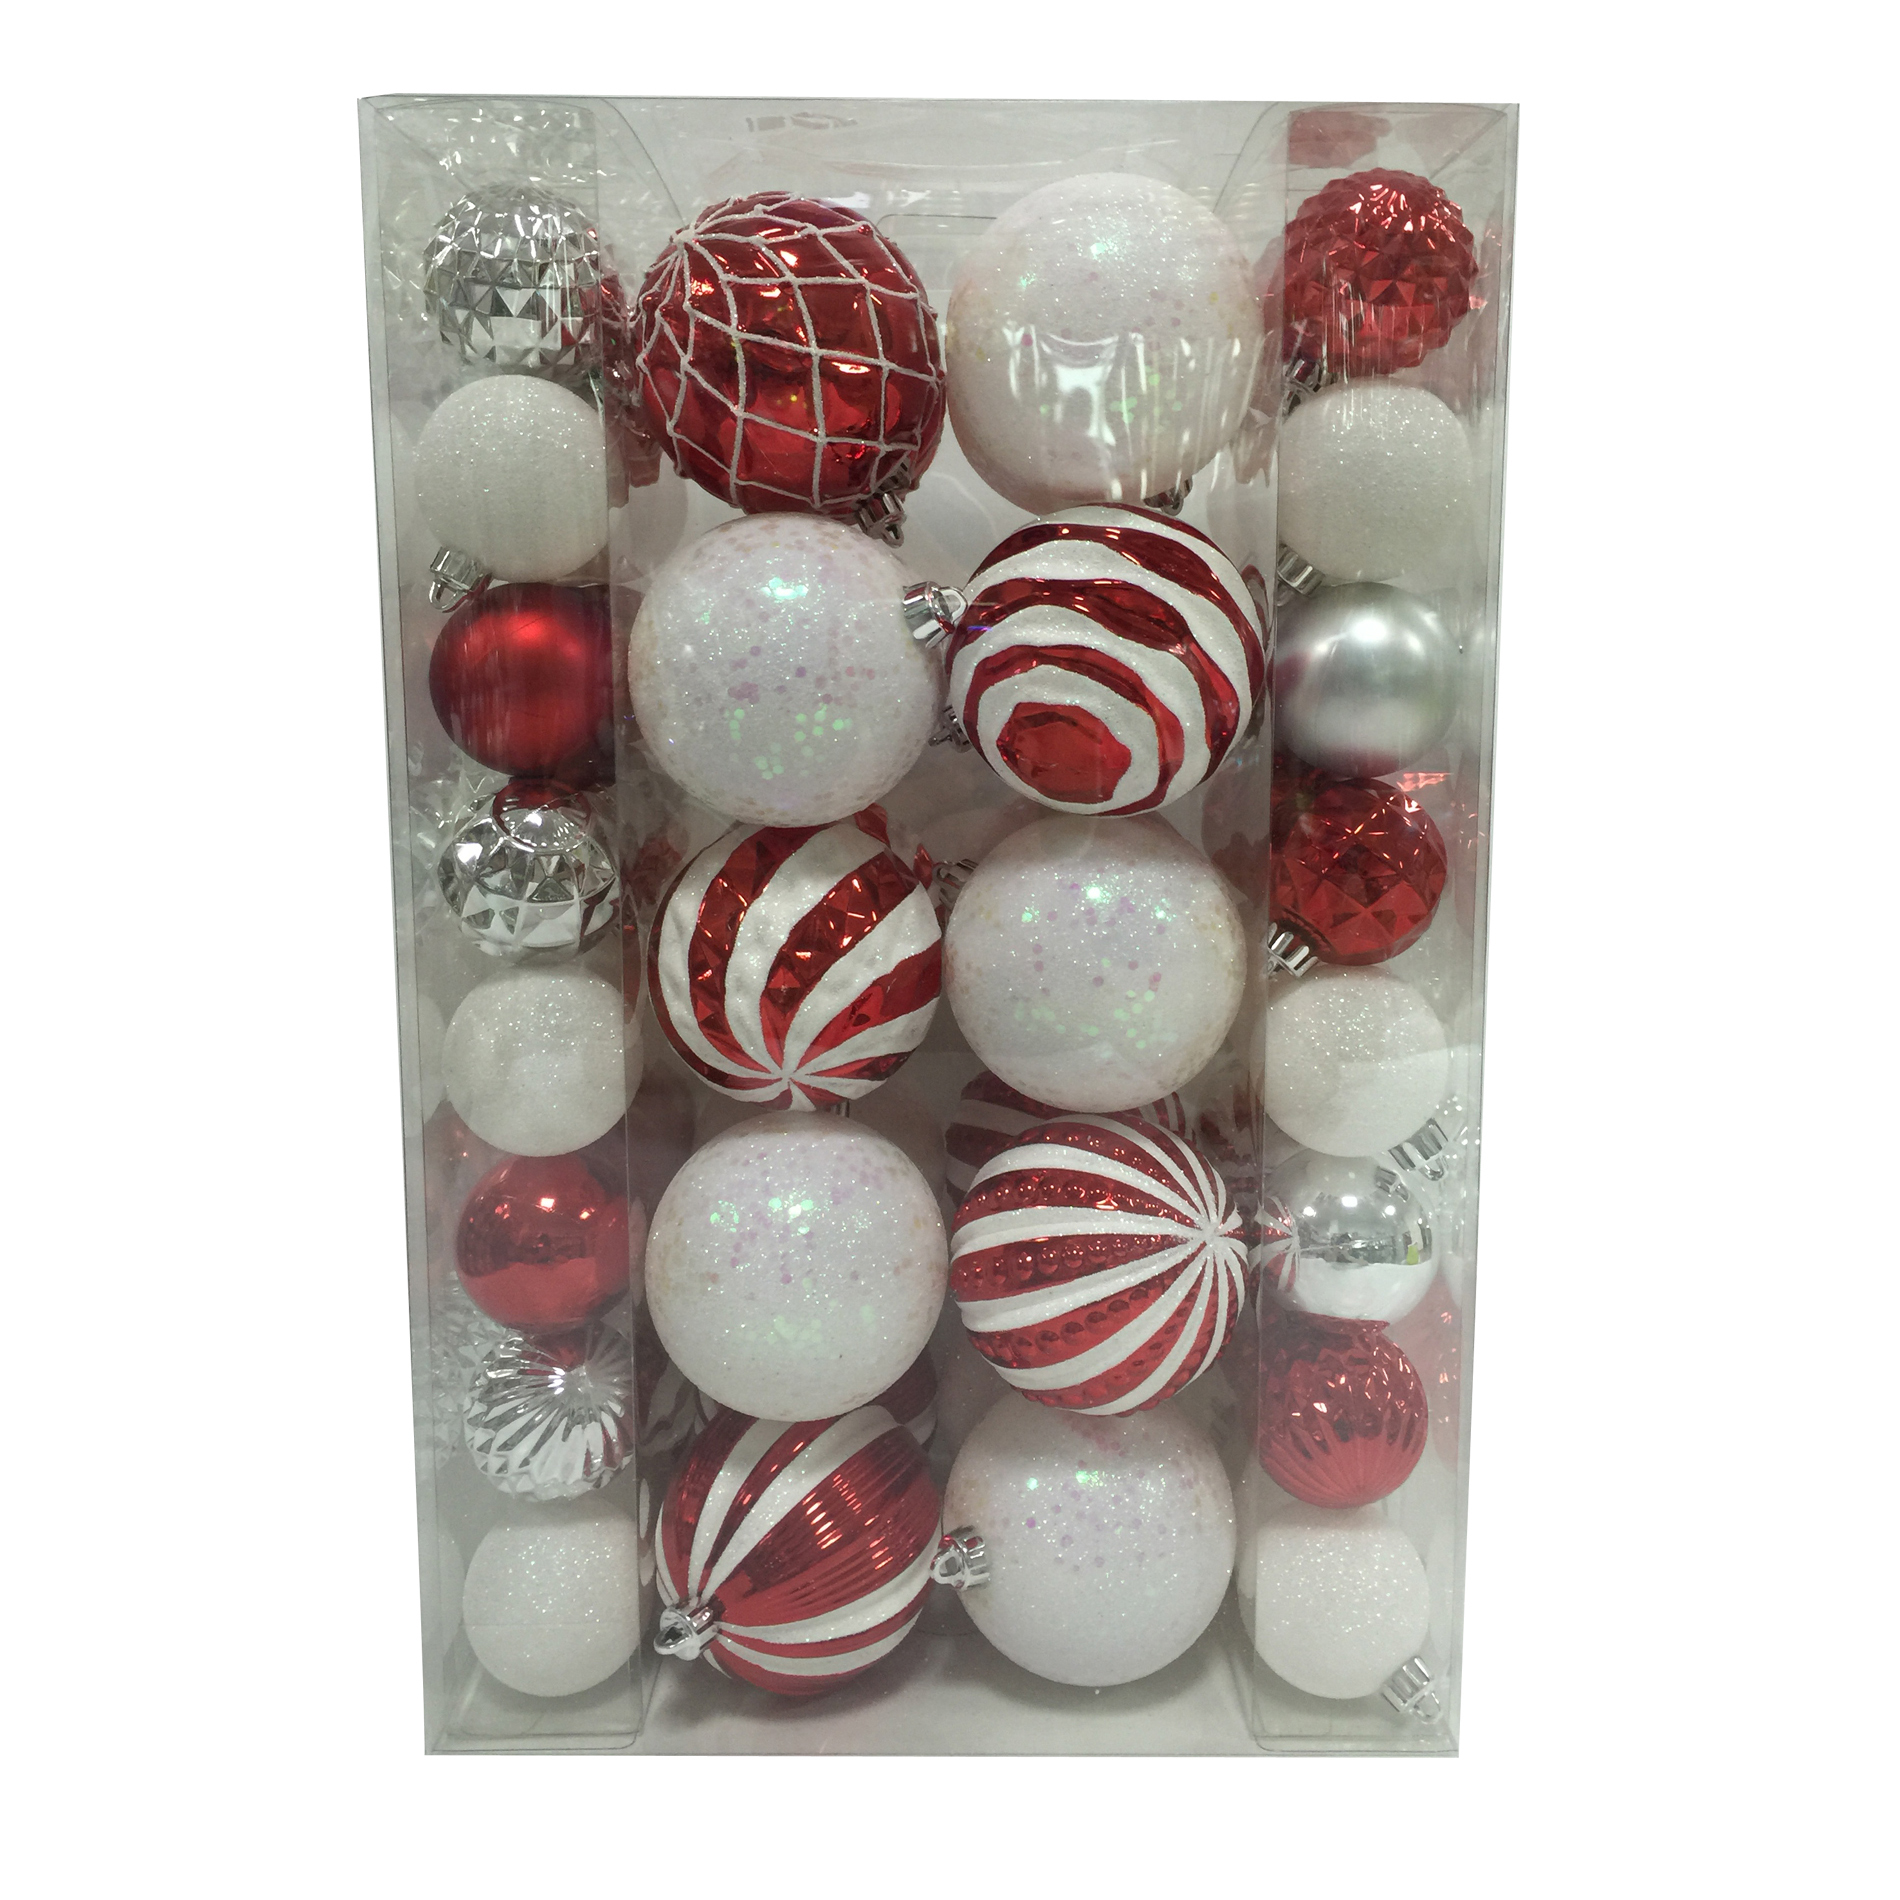 Trimming Traditions 68 ct Red, Silver and White Shatterproof Christmas Ornament Set - Seasonal ...